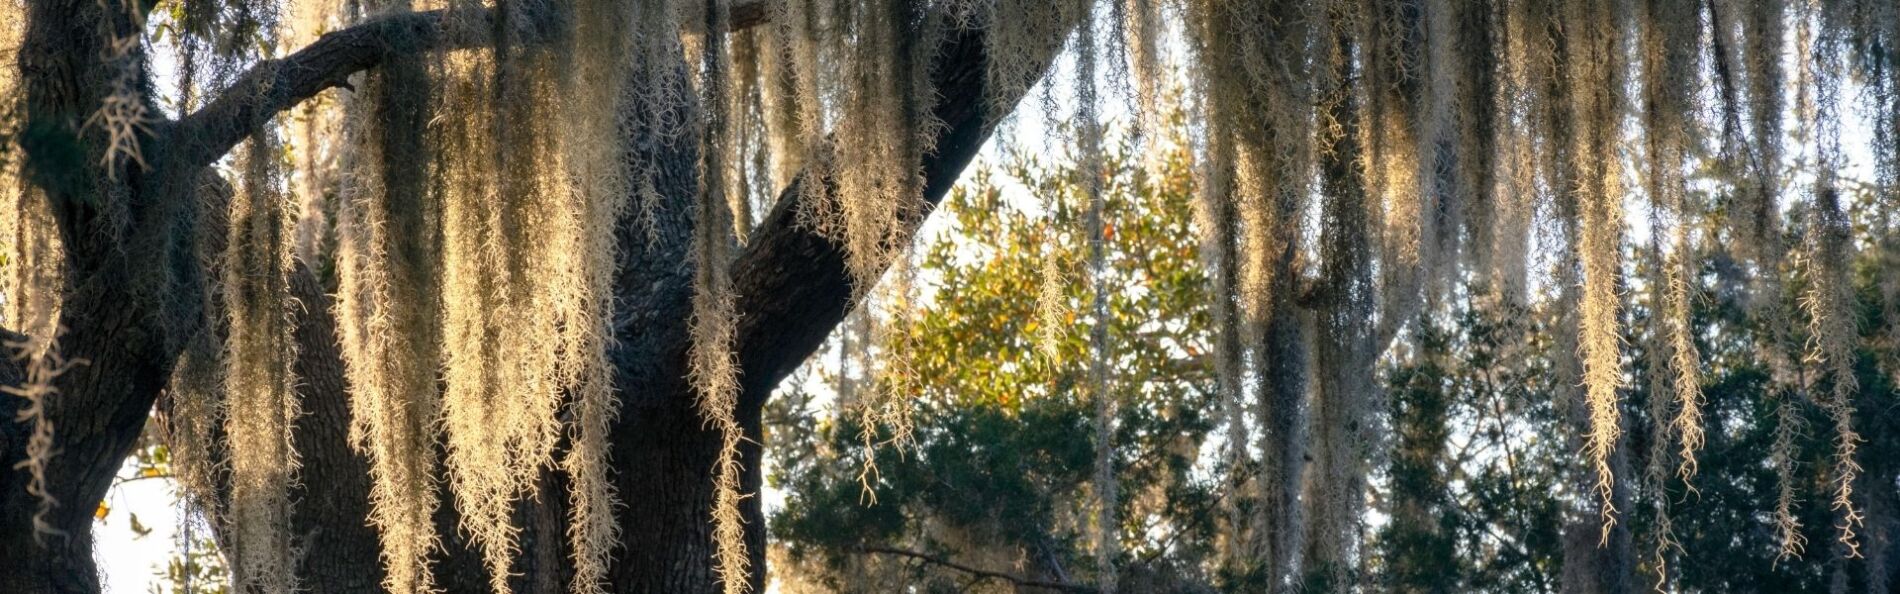 moss hanging from a tree